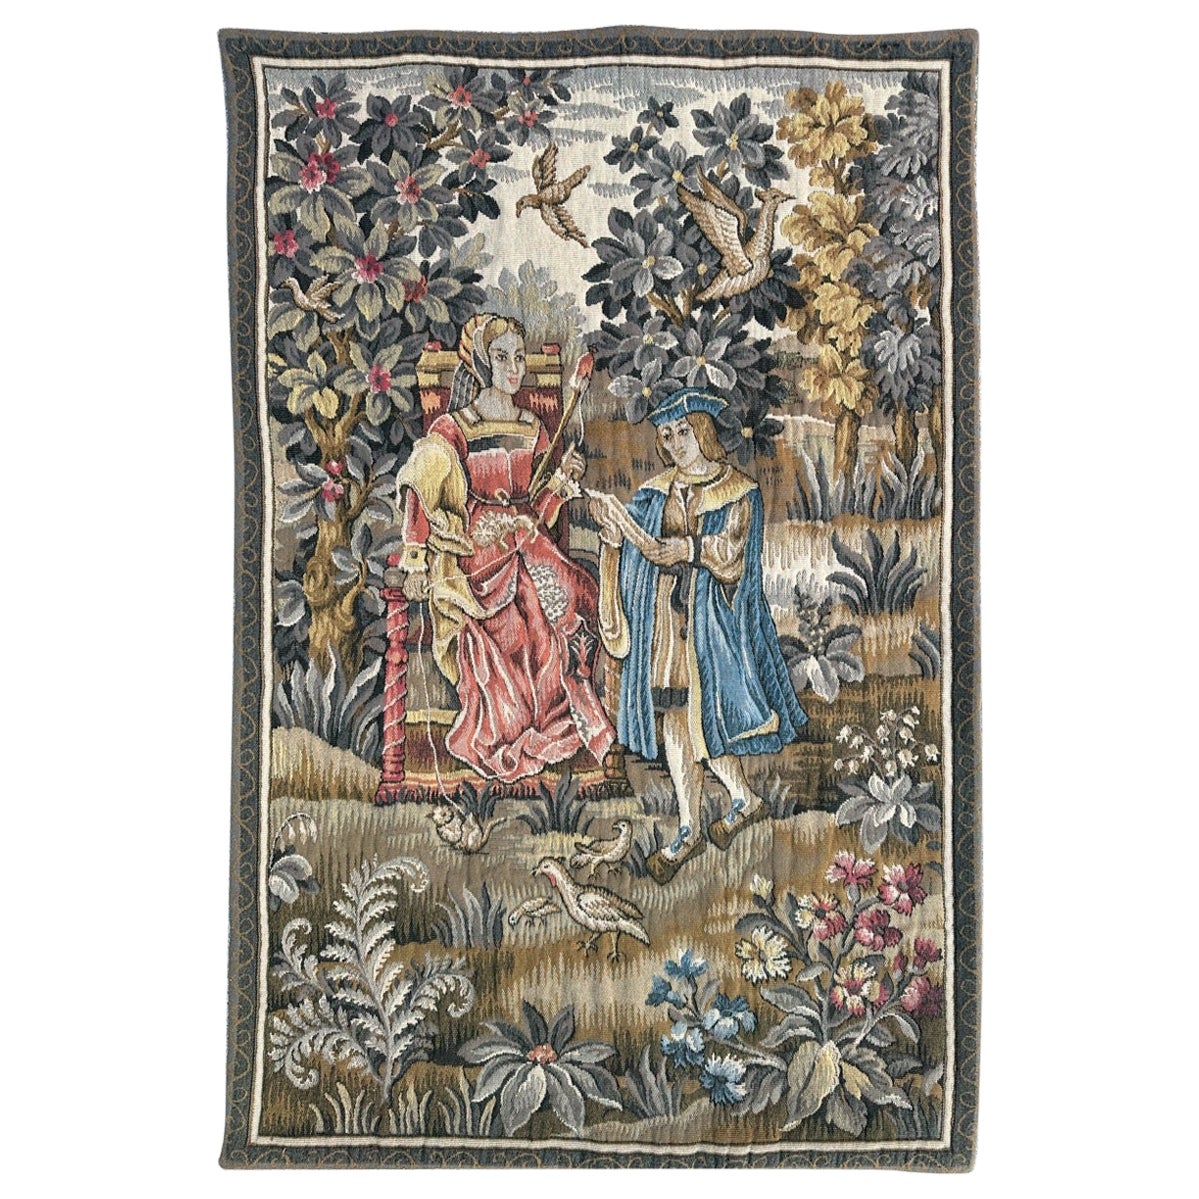 Bobyrug’s Nice French Jaquar Tapestry Medieval Aubusson Style Design